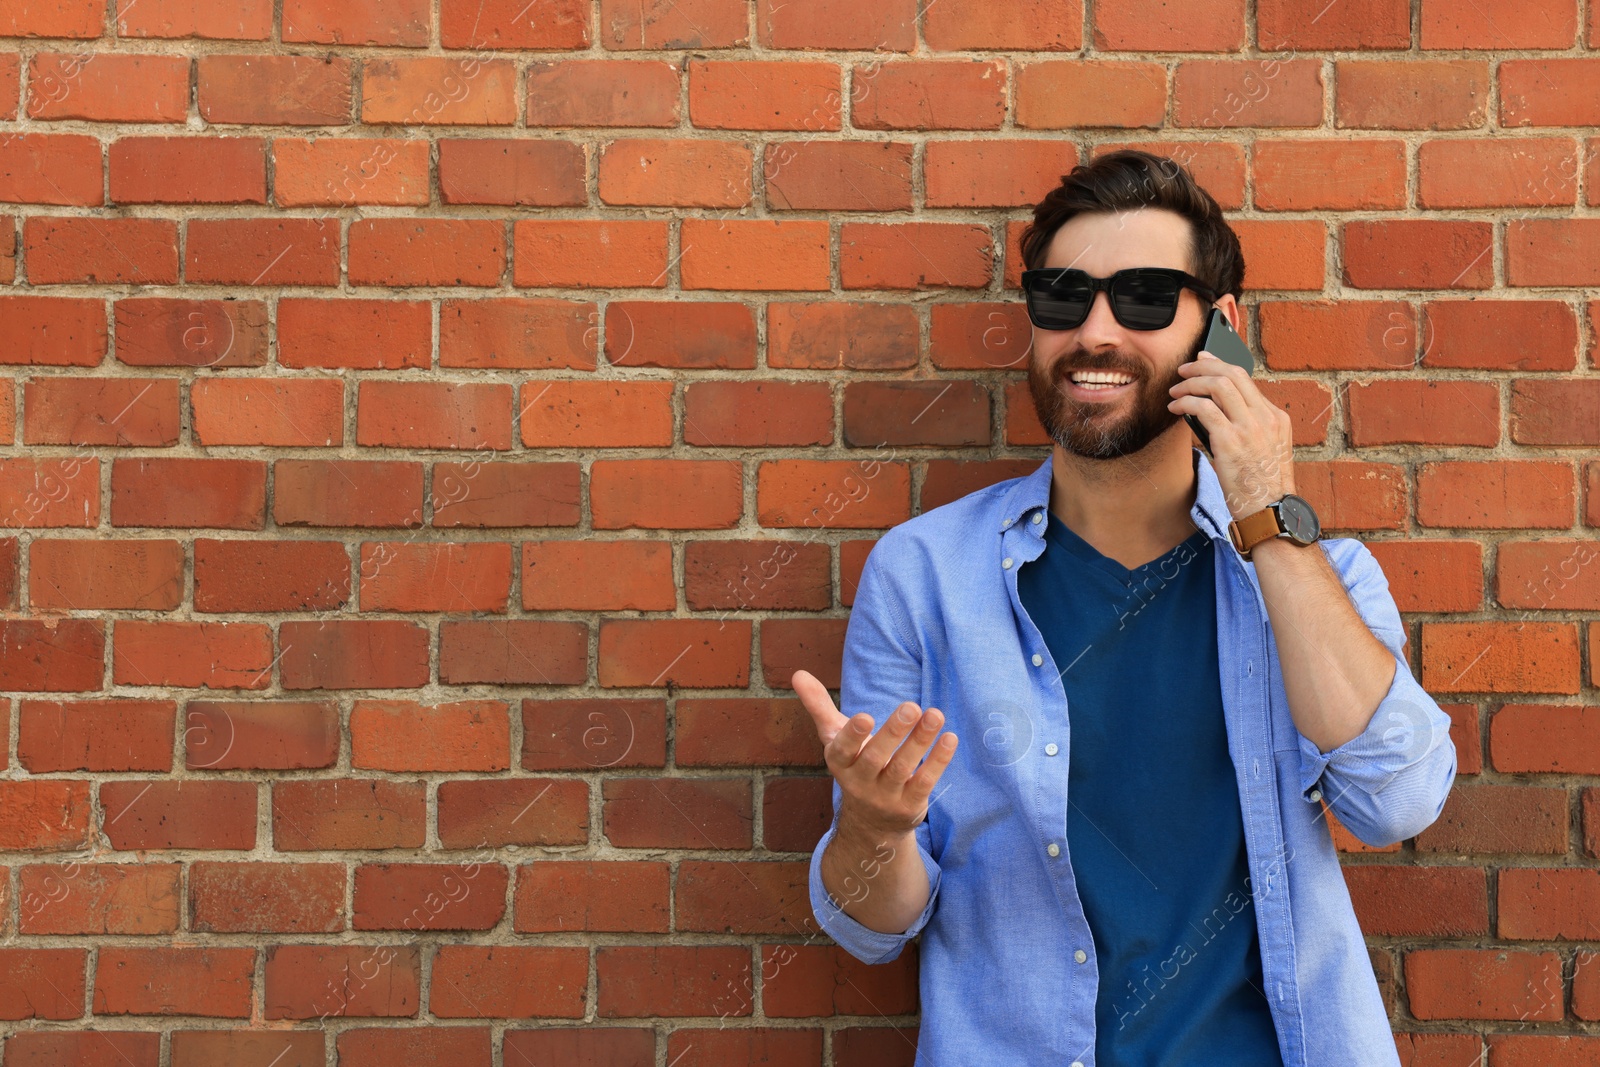 Photo of Happy man talking on phone near red brick wall. Space for text